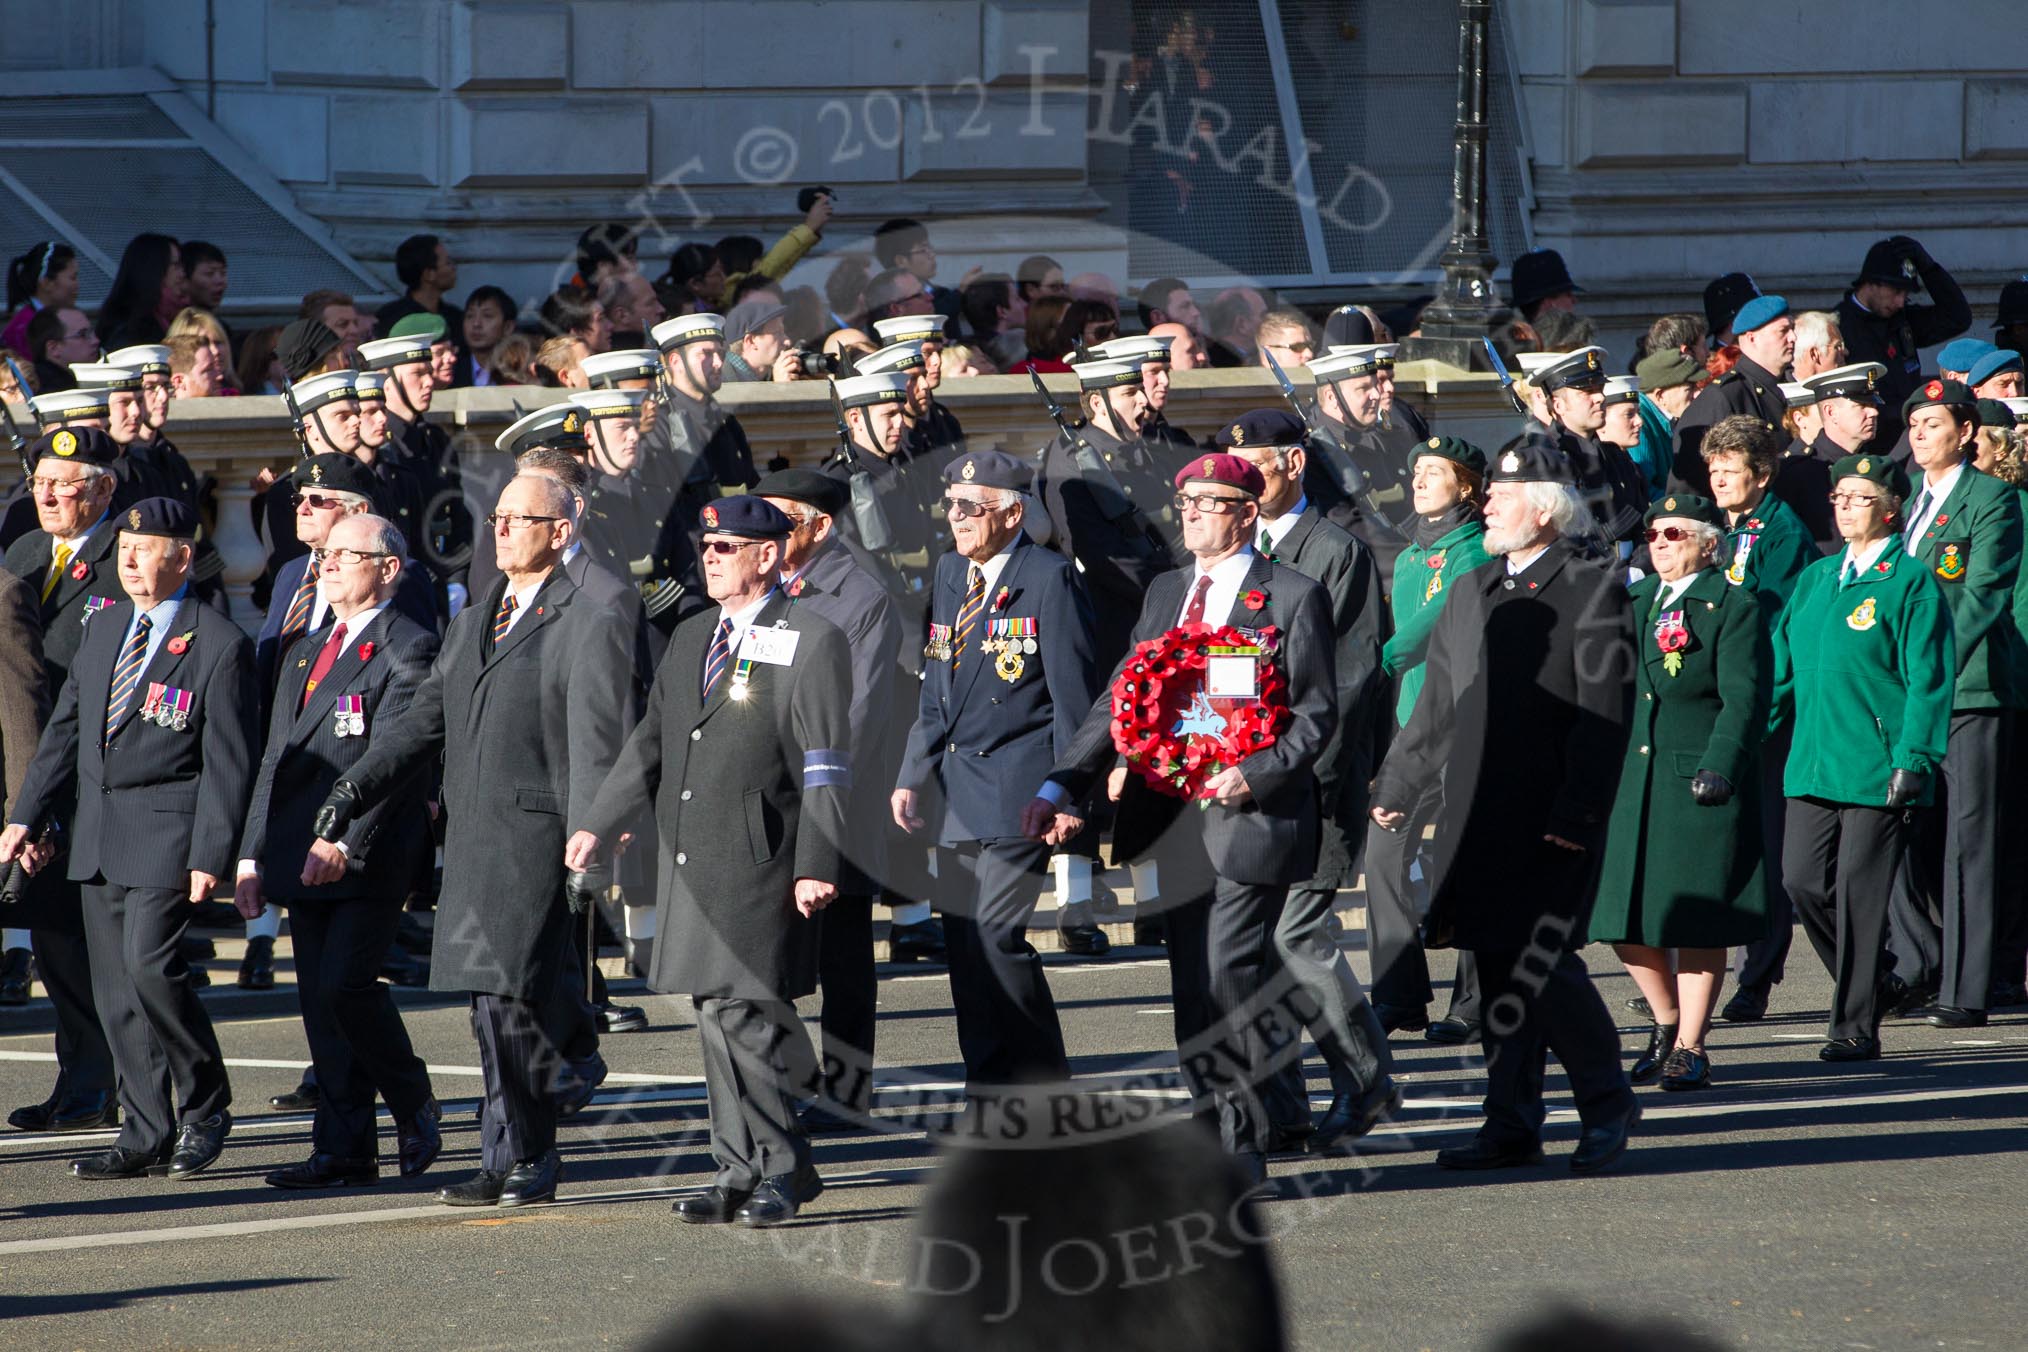 Remembrance Sunday 2012 Cenotaph March Past: Group B20 - Arborfield Old Boys Association, and B21 - Women's Royal Army Corps Association..
Whitehall, Cenotaph,
London SW1,

United Kingdom,
on 11 November 2012 at 11:57, image #944